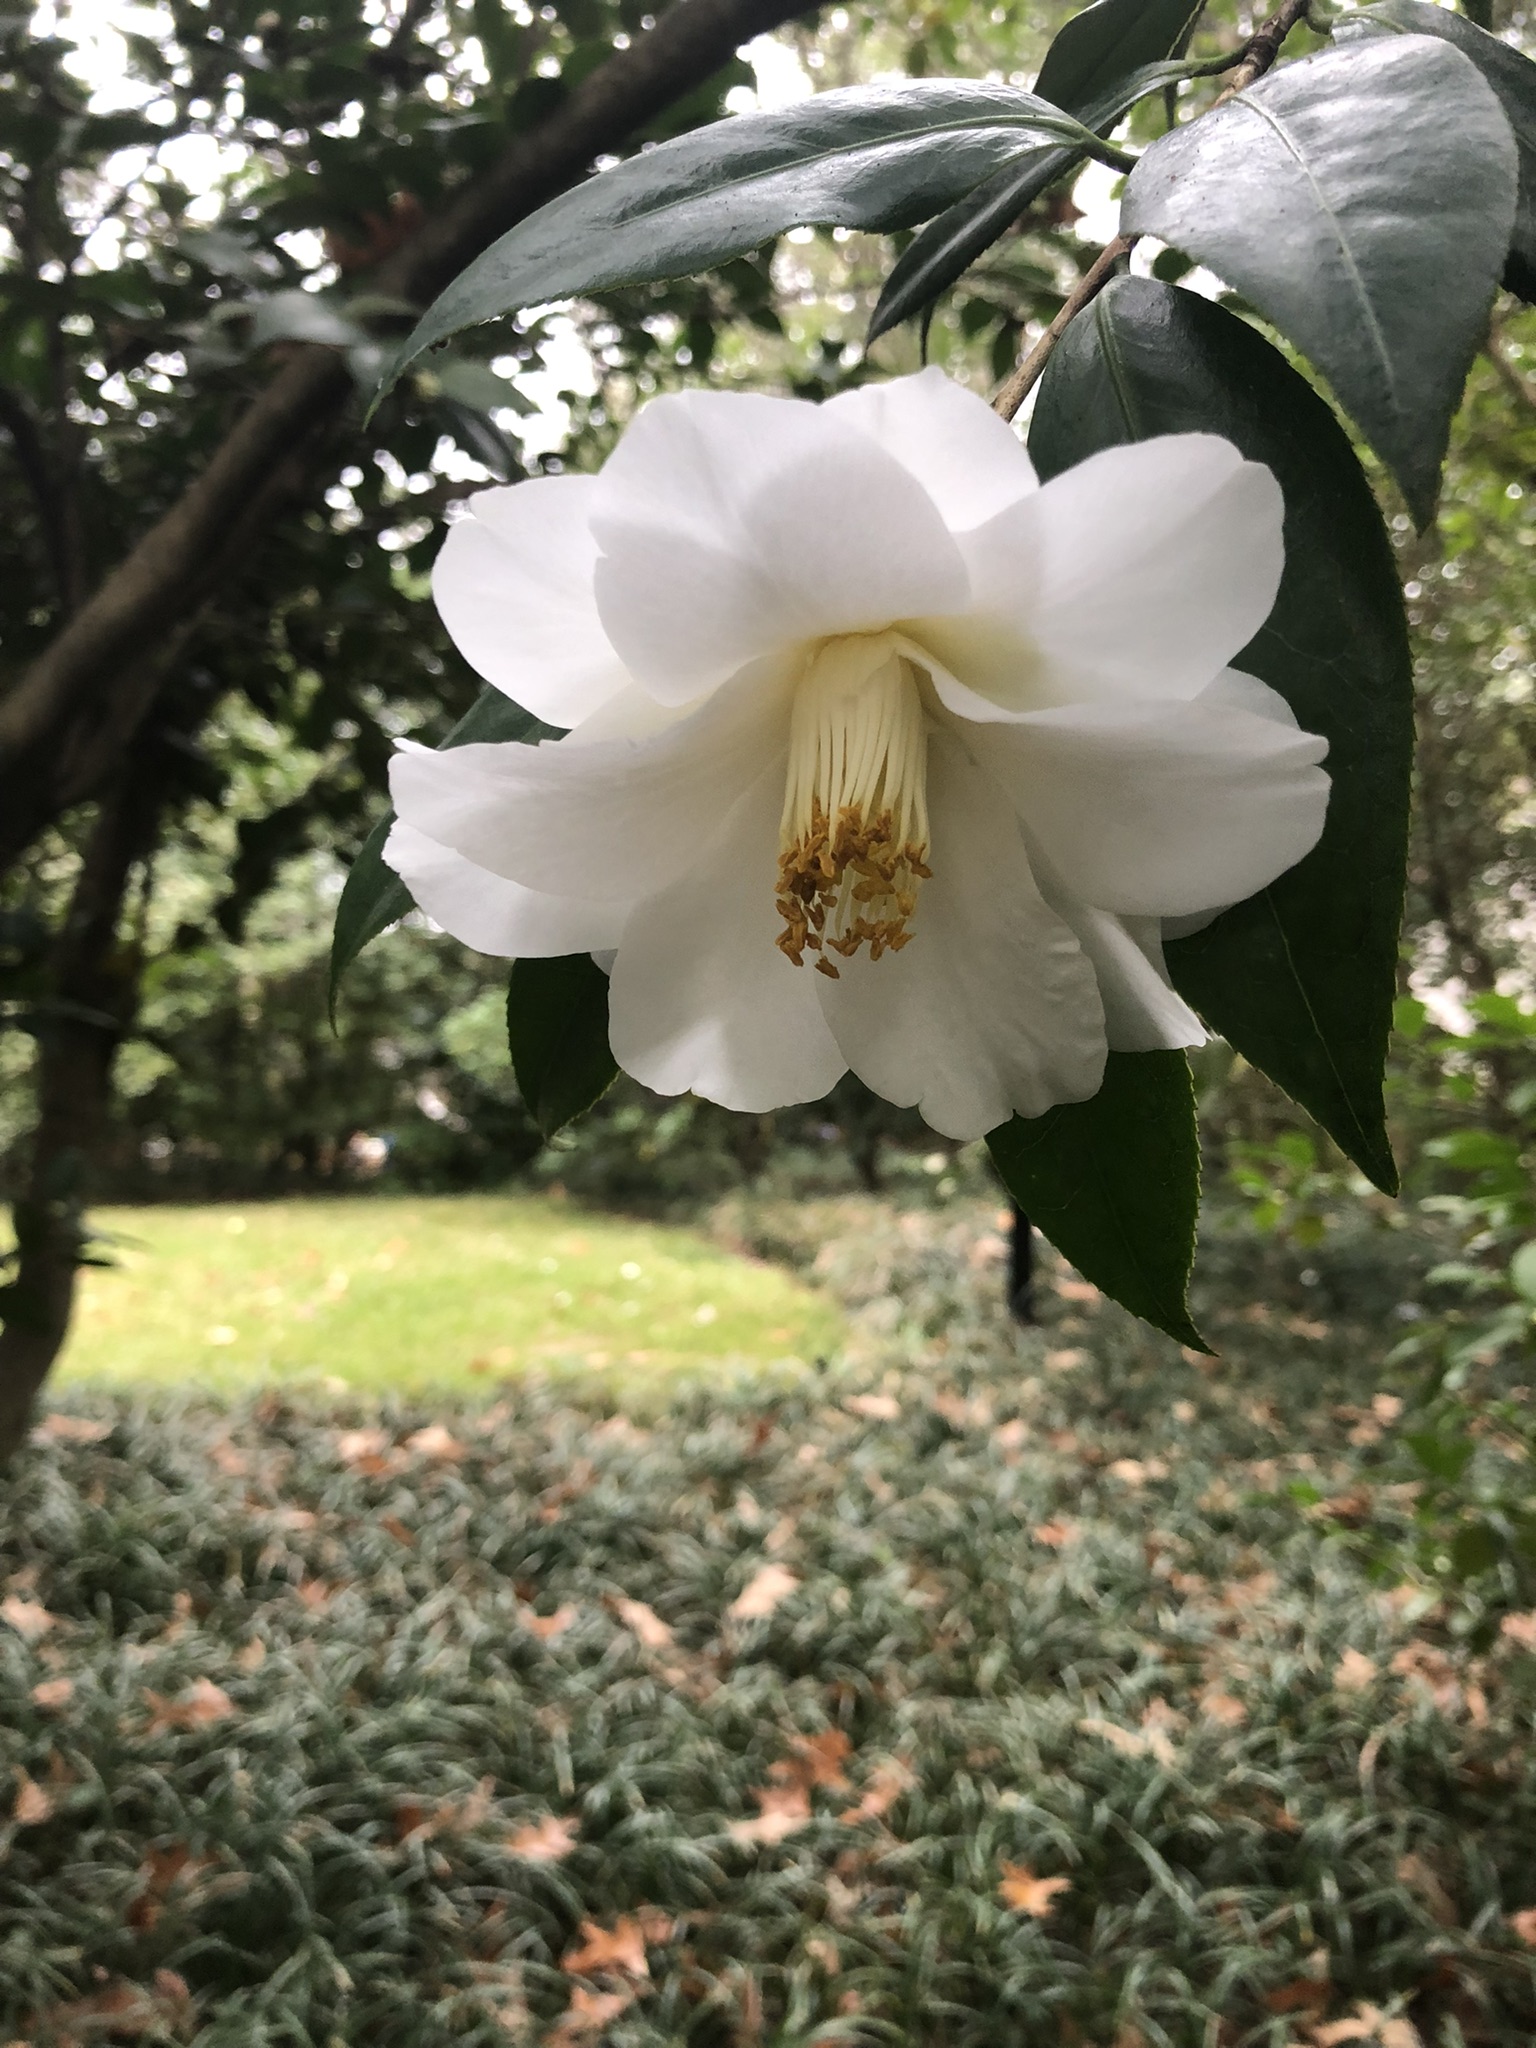 White Imura camellia japonica with long yellow stamens and large, oval, dark-green leaves in Eudora Welty's camellia room garden